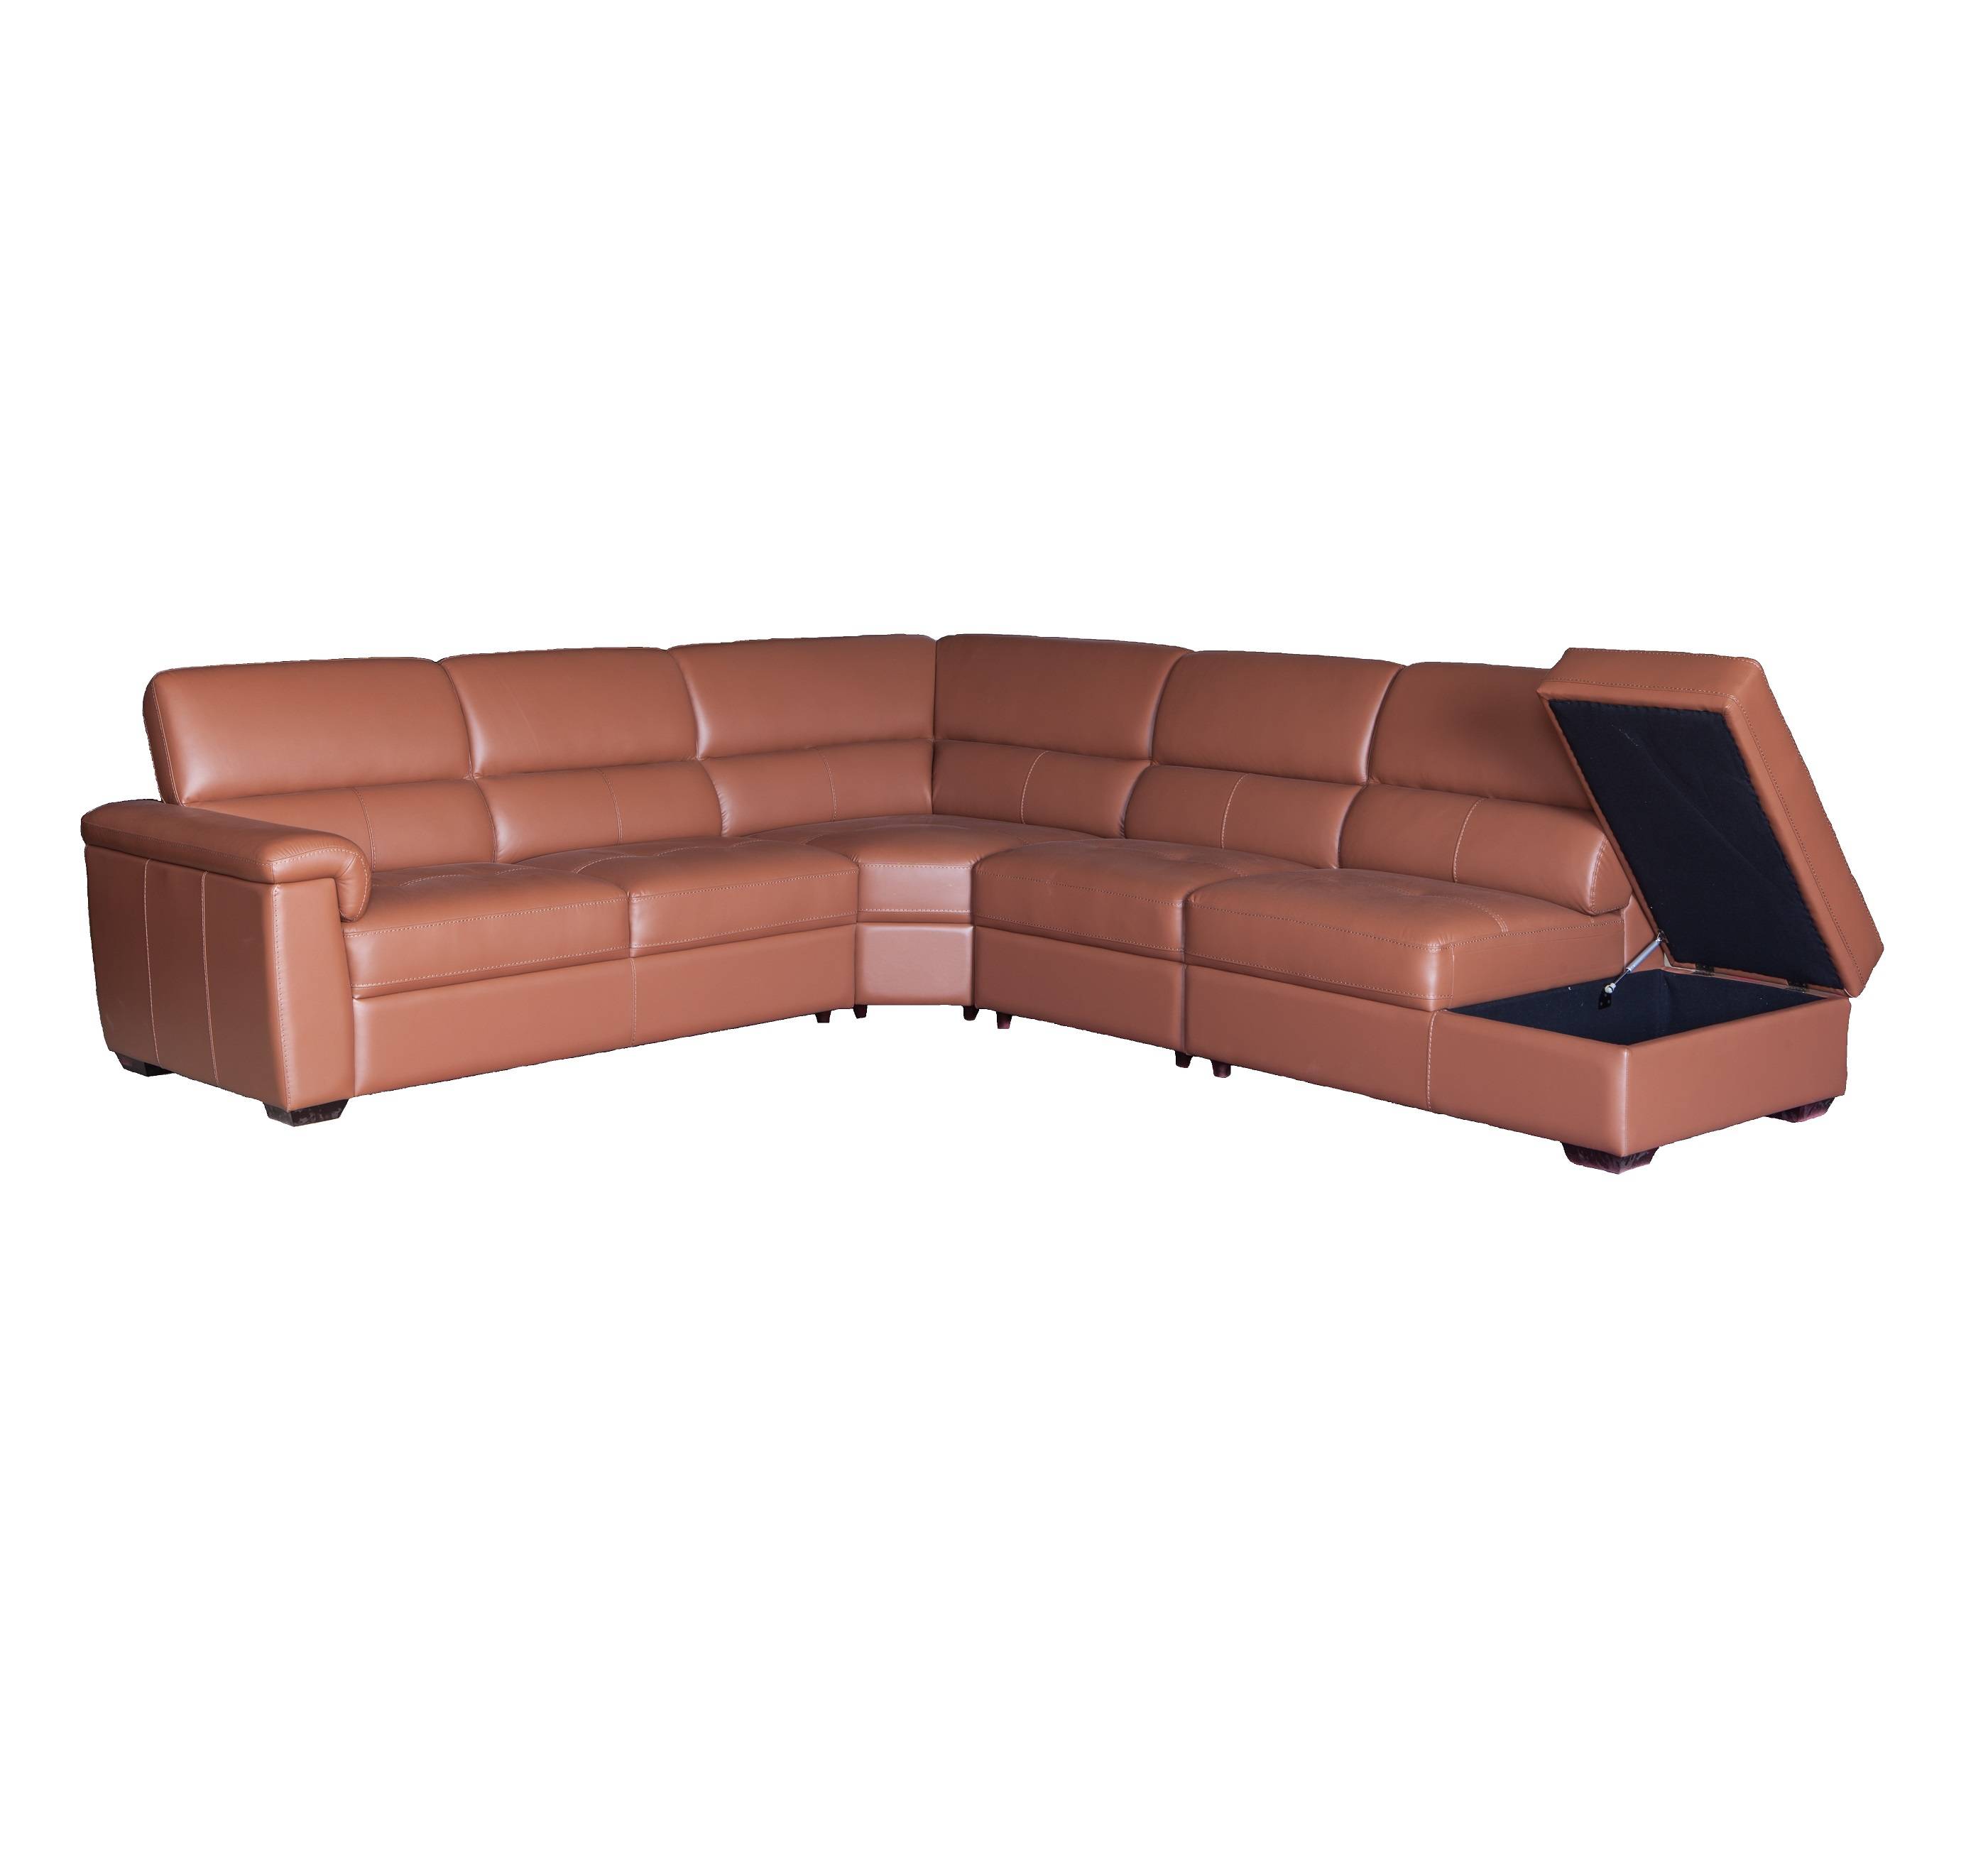 China Factory Cheap Living Room Recliner Leather Corner Sofa Modern Living Room Furniture 6 Seater L Shape Leather Corner Sofa Chuan Yang Factory And Manufacturers Chuan Yang